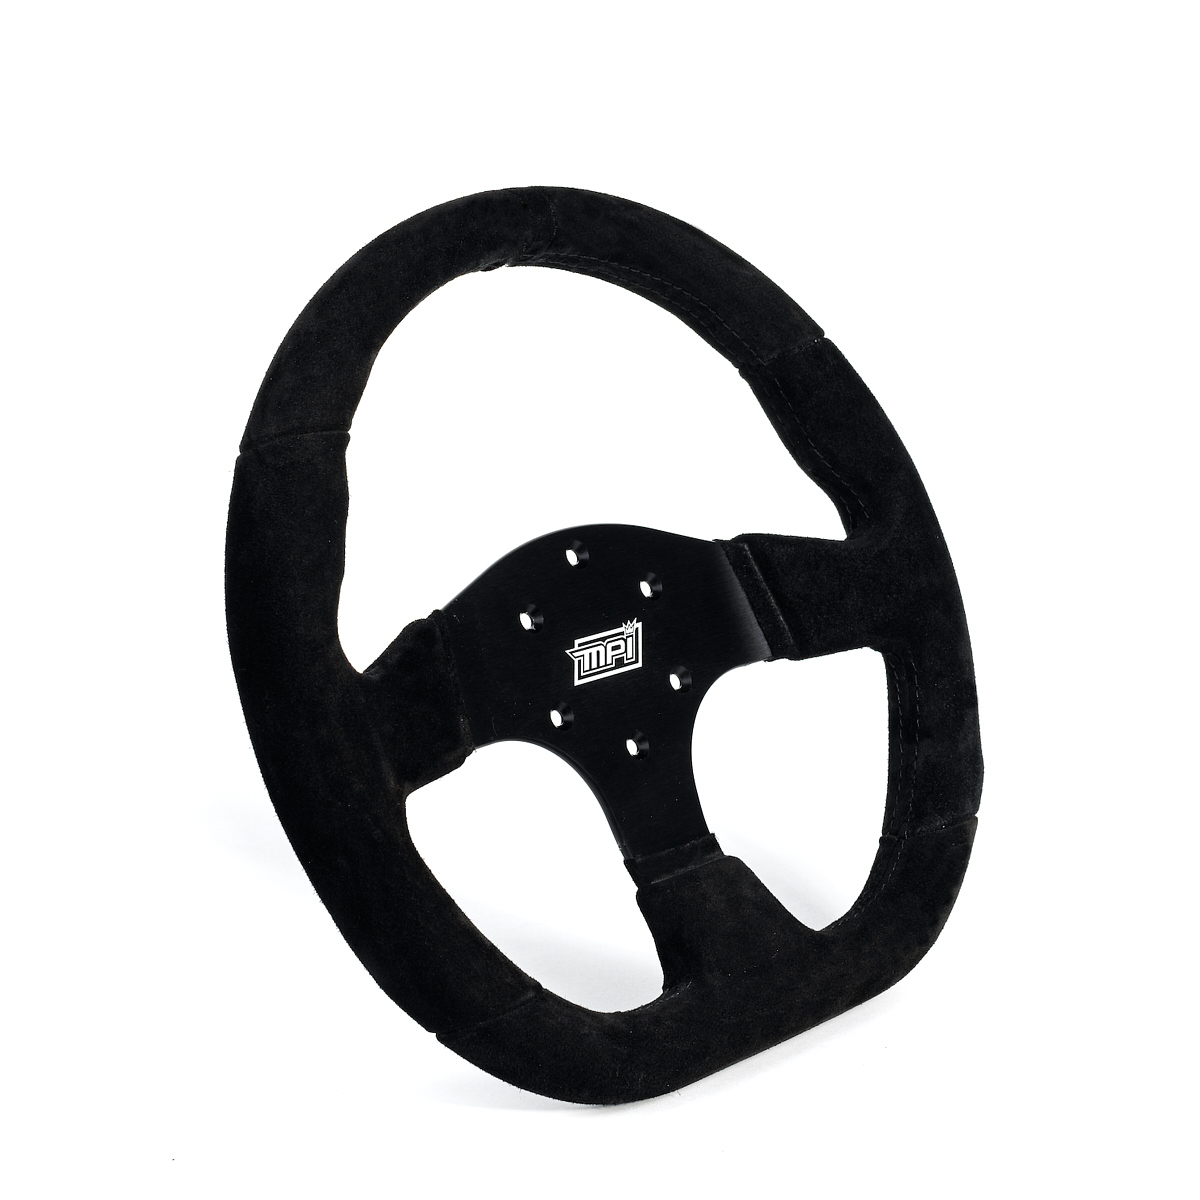 MPI USA MPI-GT2-13-B Steering Wheel, Touring, 13 in Diameter, D-Shaped, 1-1/4 in Dish, 3-Spoke, Black Suede Grip, Aluminum, Black Anodized, Each